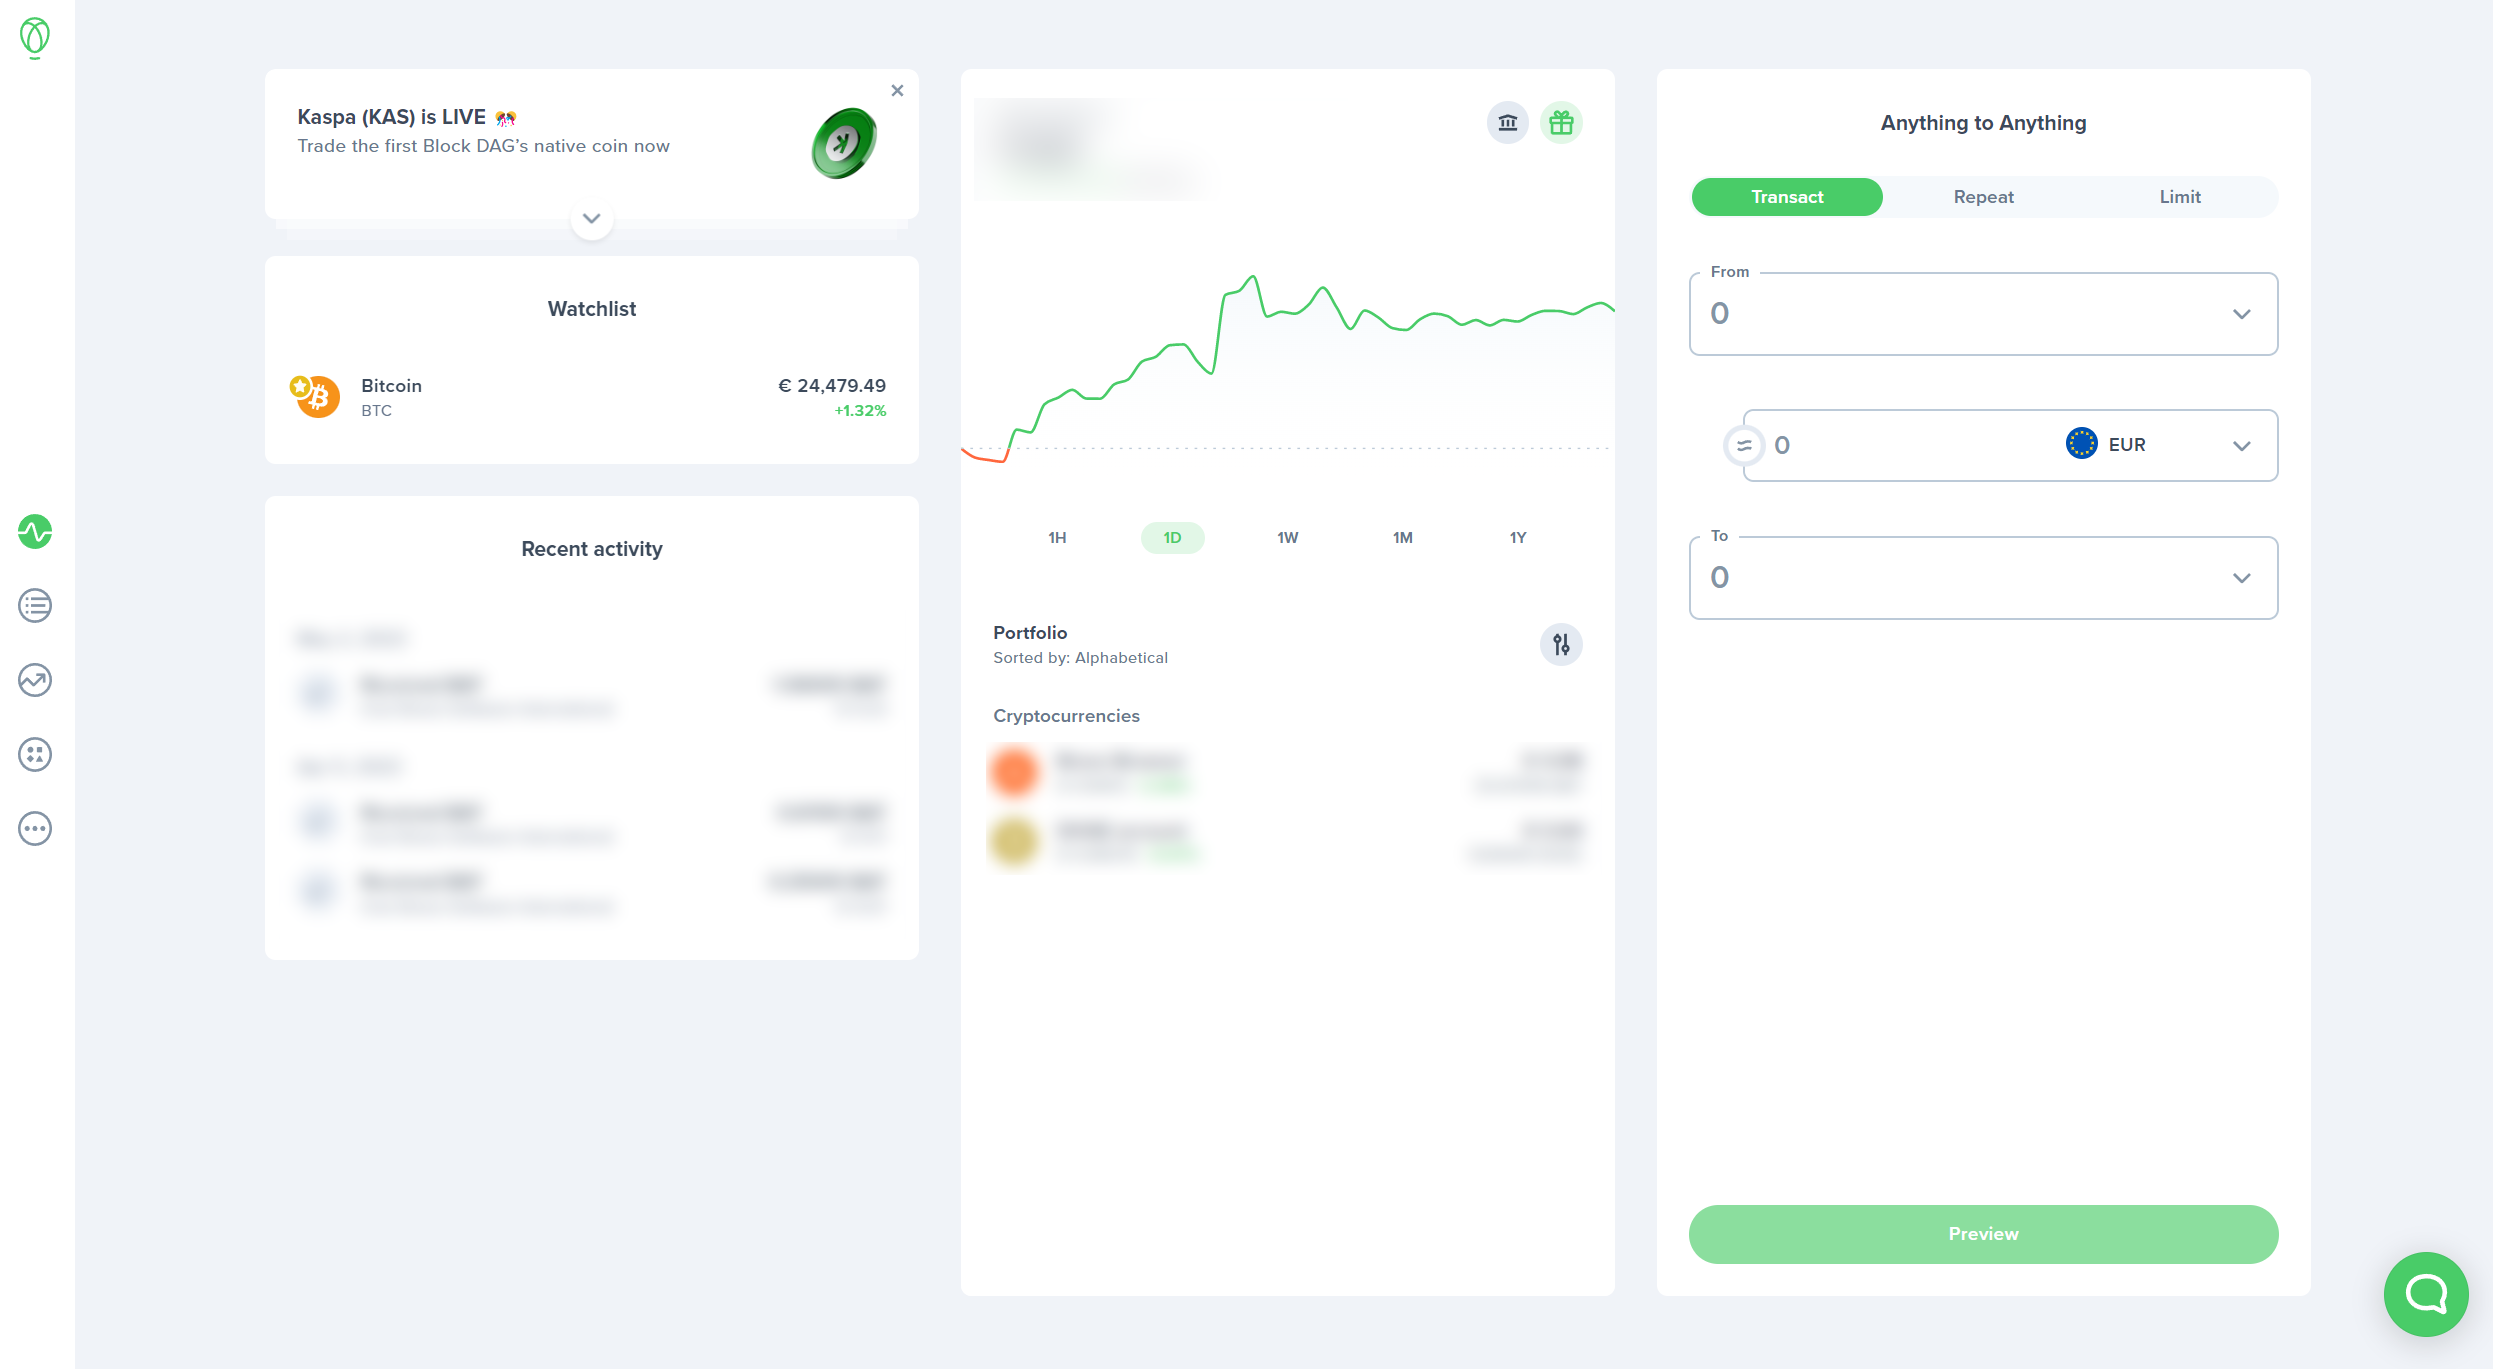 The Uphold Dashboard